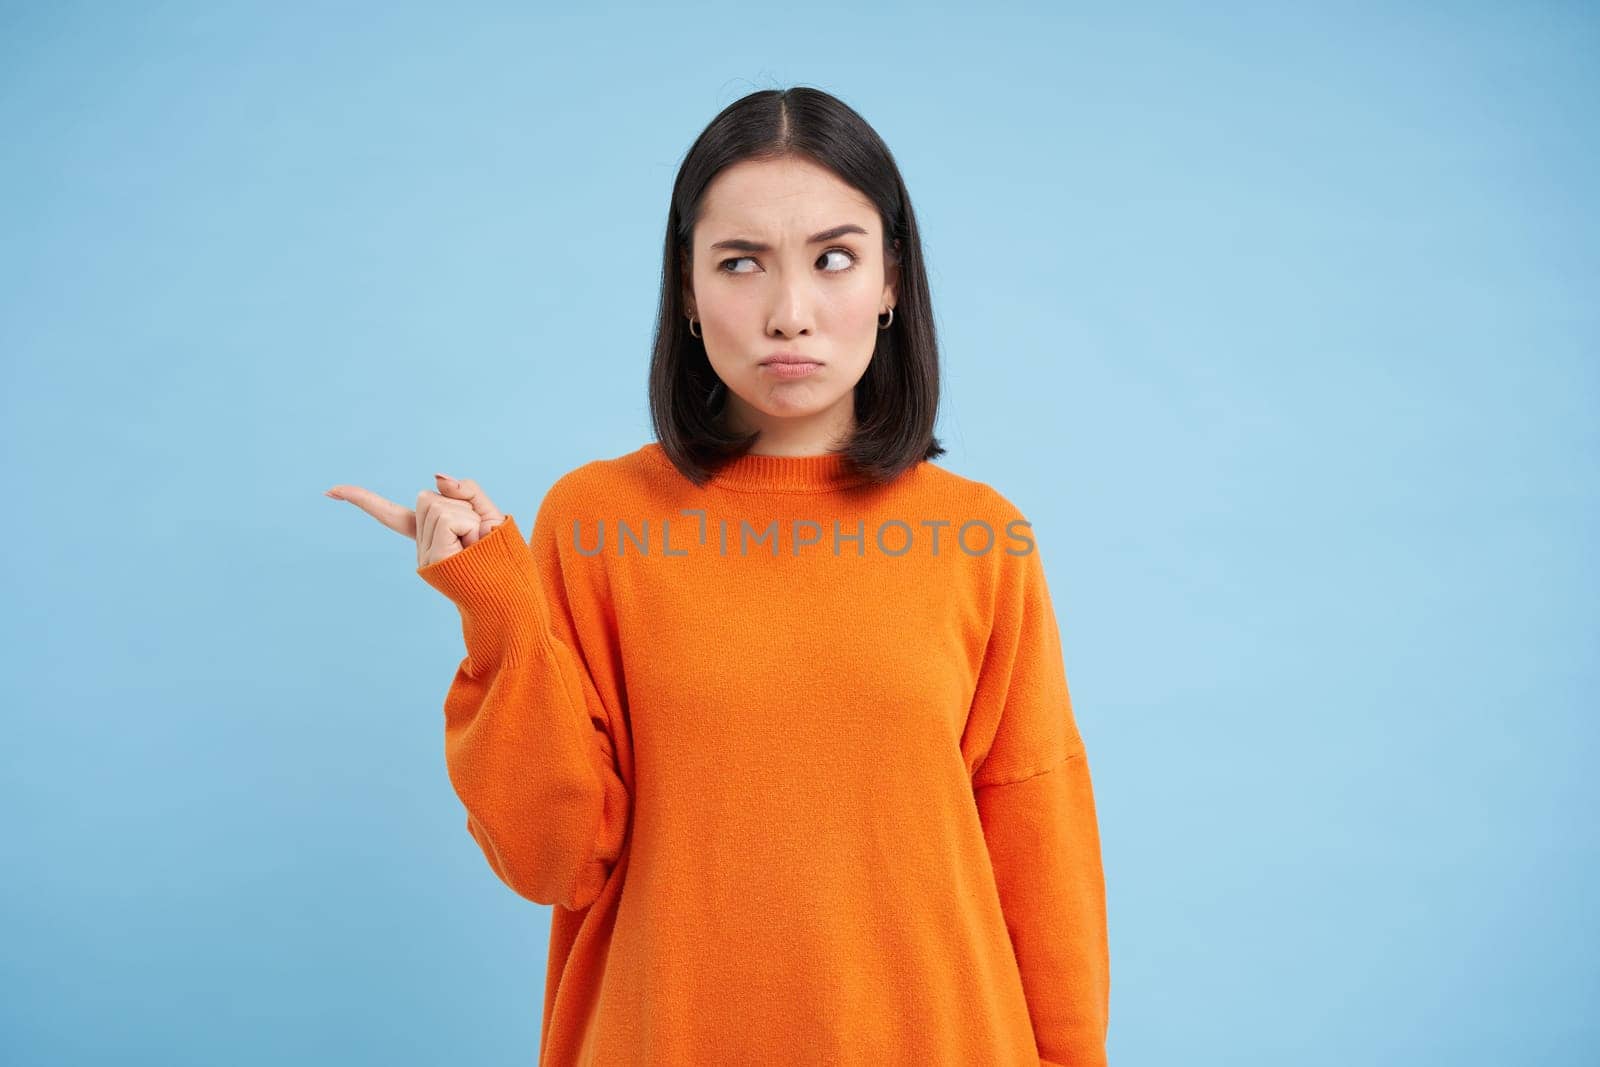 Confused korean girl cant understand something, points left with clueless face, thinking, standing in orange shirt against blue background.